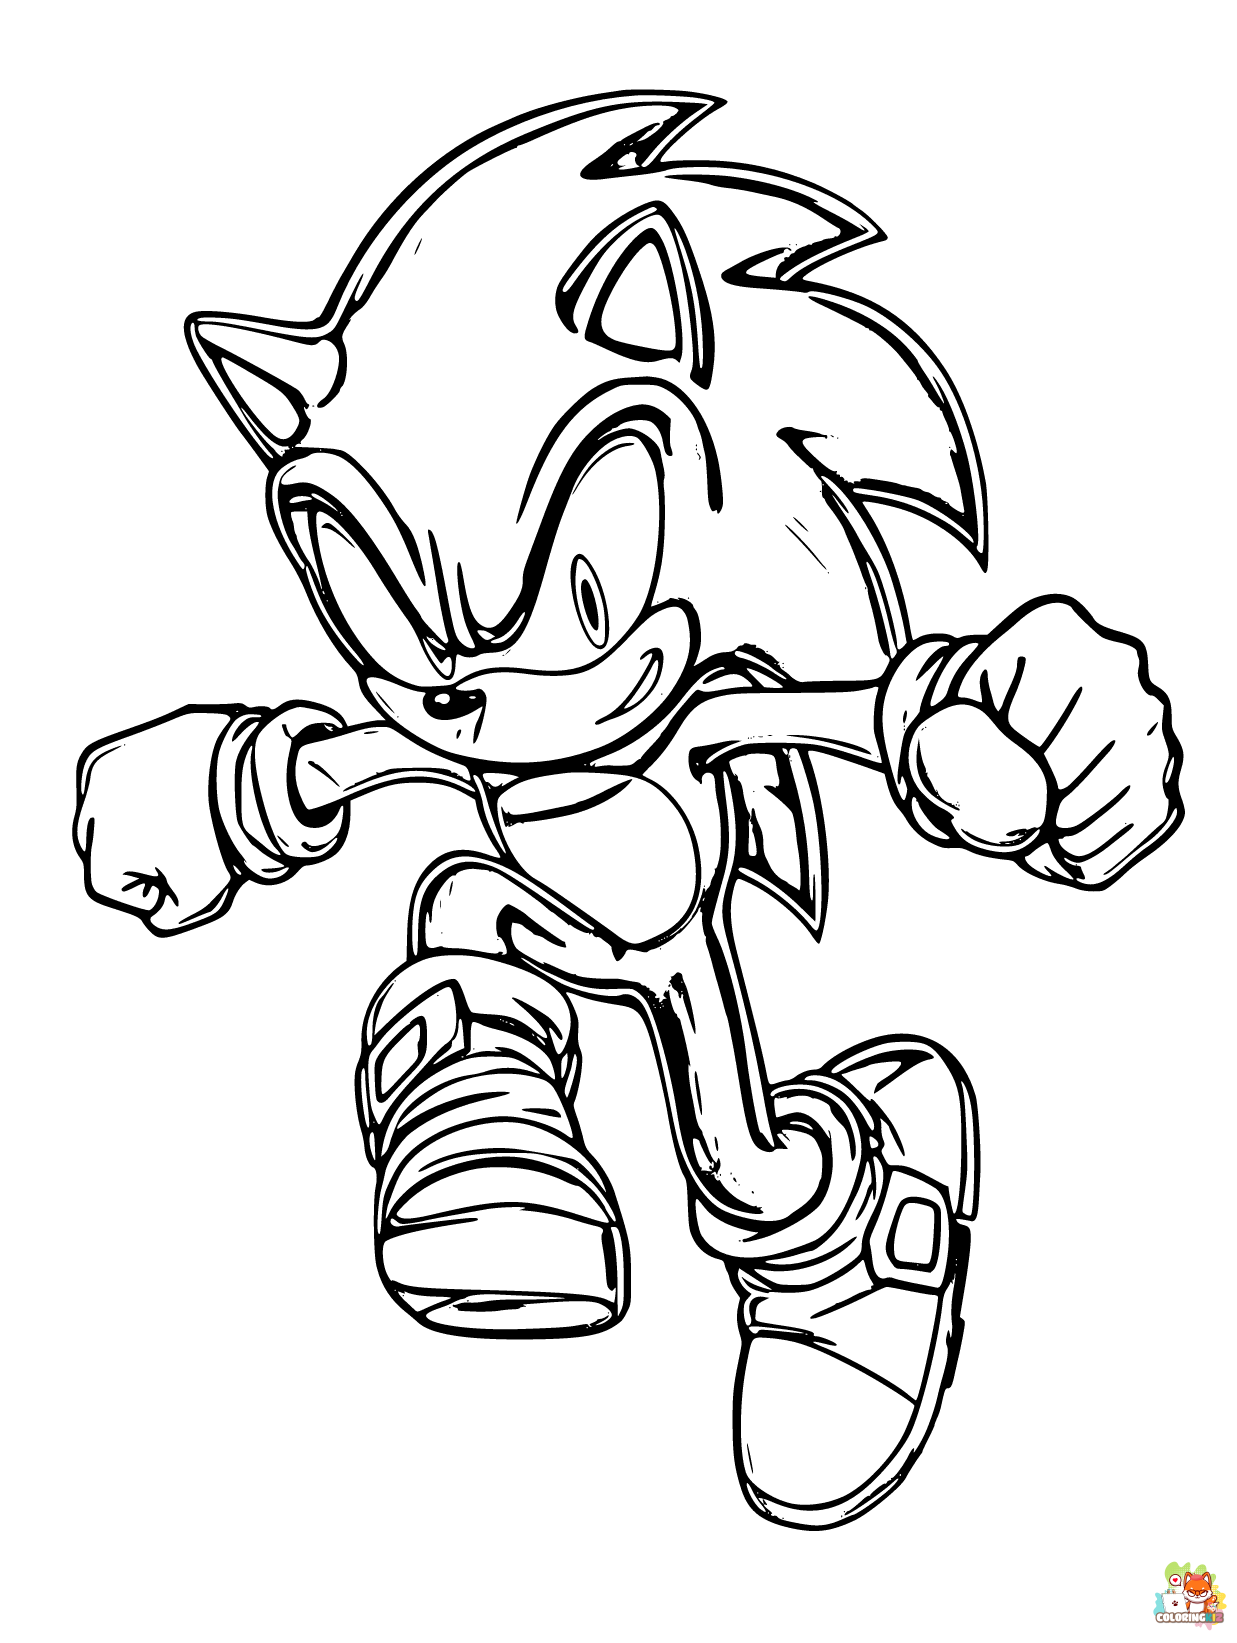 Sonic coloring pages for kids 2